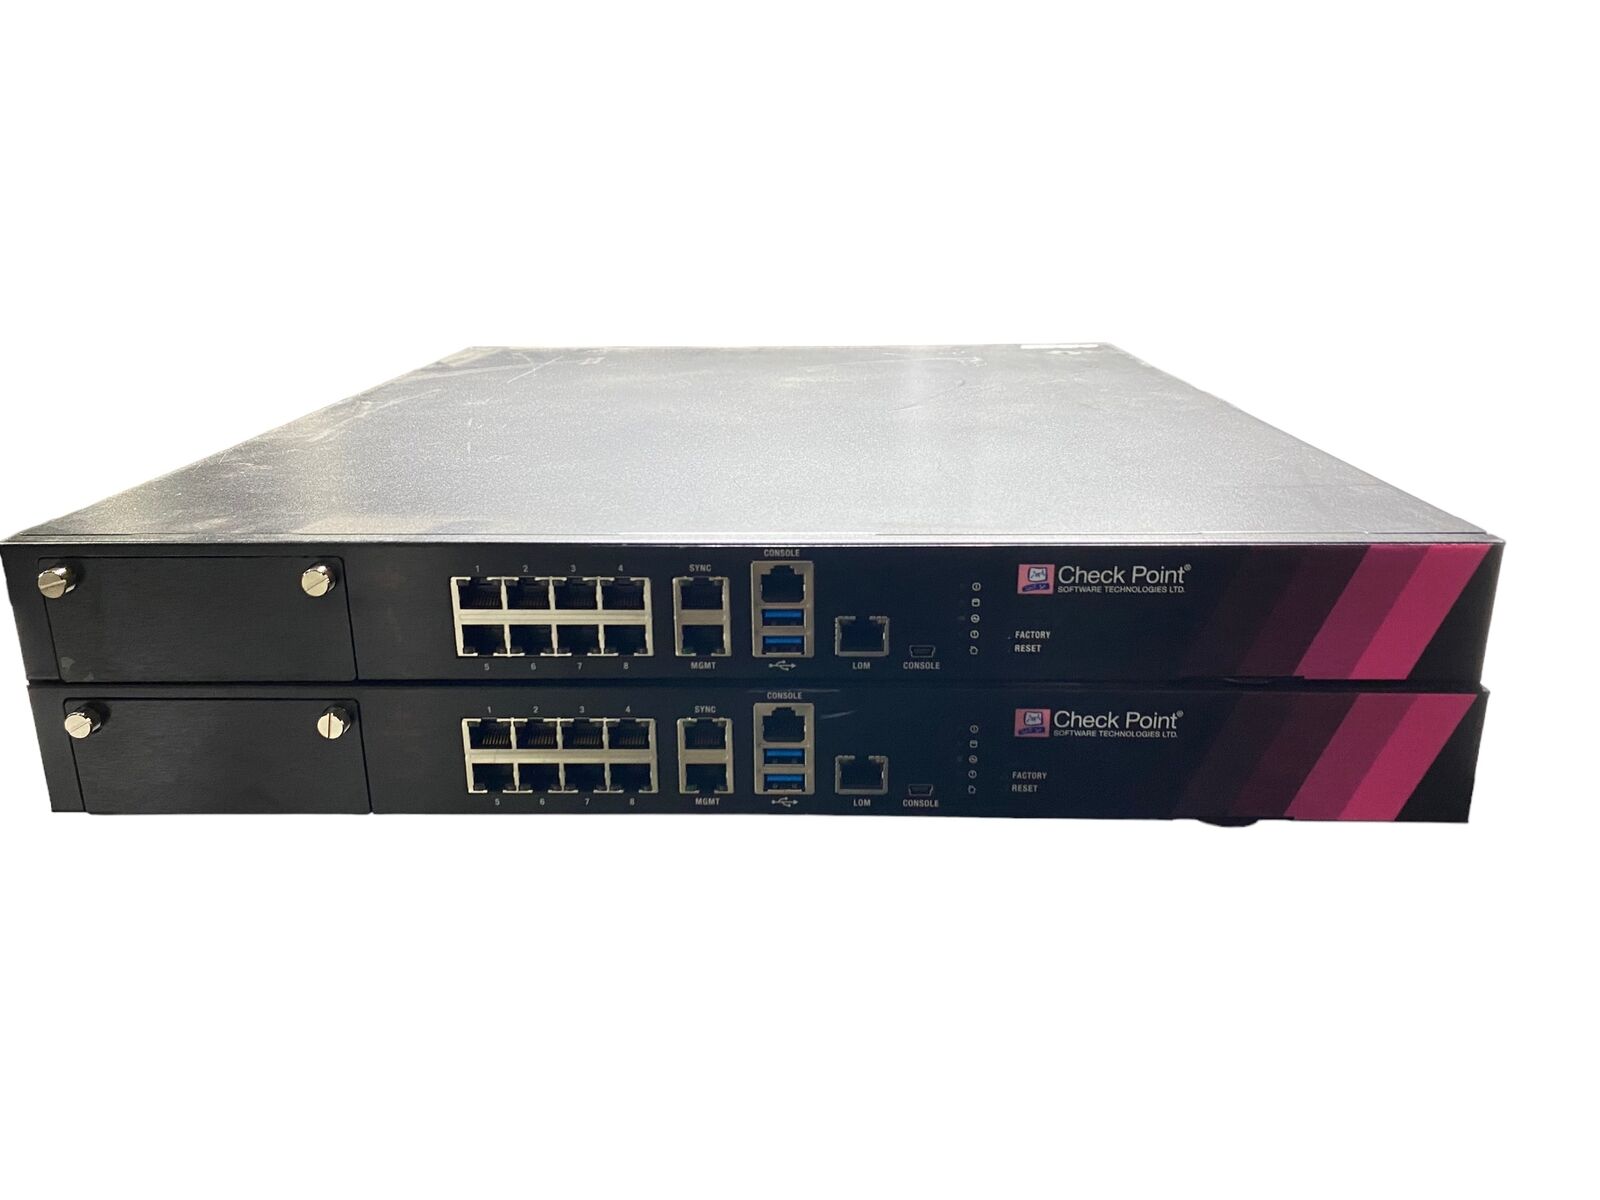 Check Point Software 5600 Series PL-20 Network Security